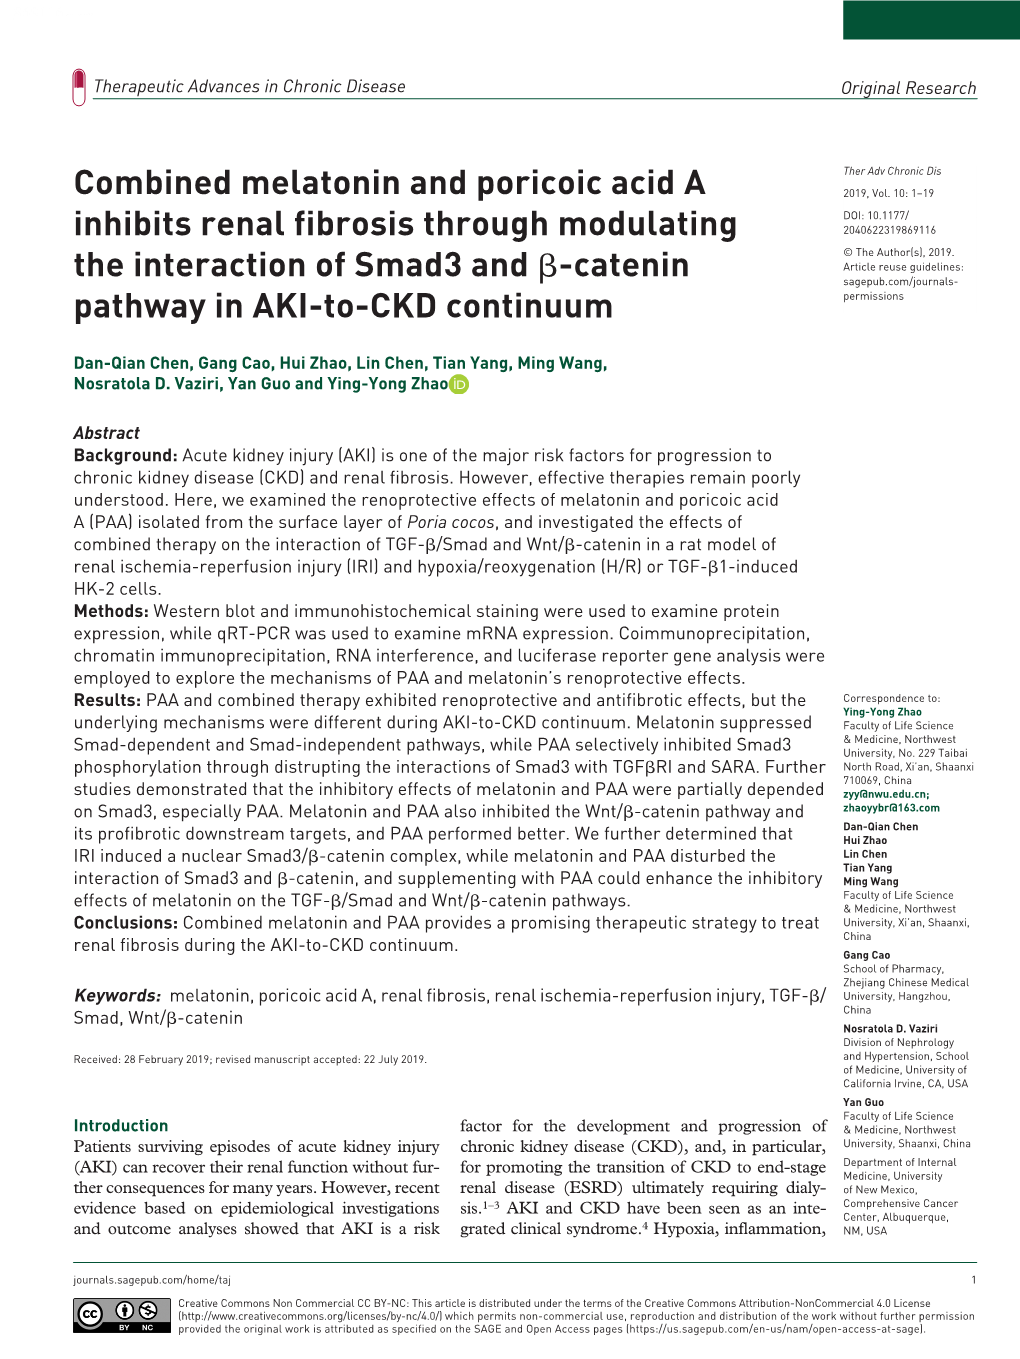 Combined Melatonin and Poricoic Acid a Inhibits Renal Fibrosis Through